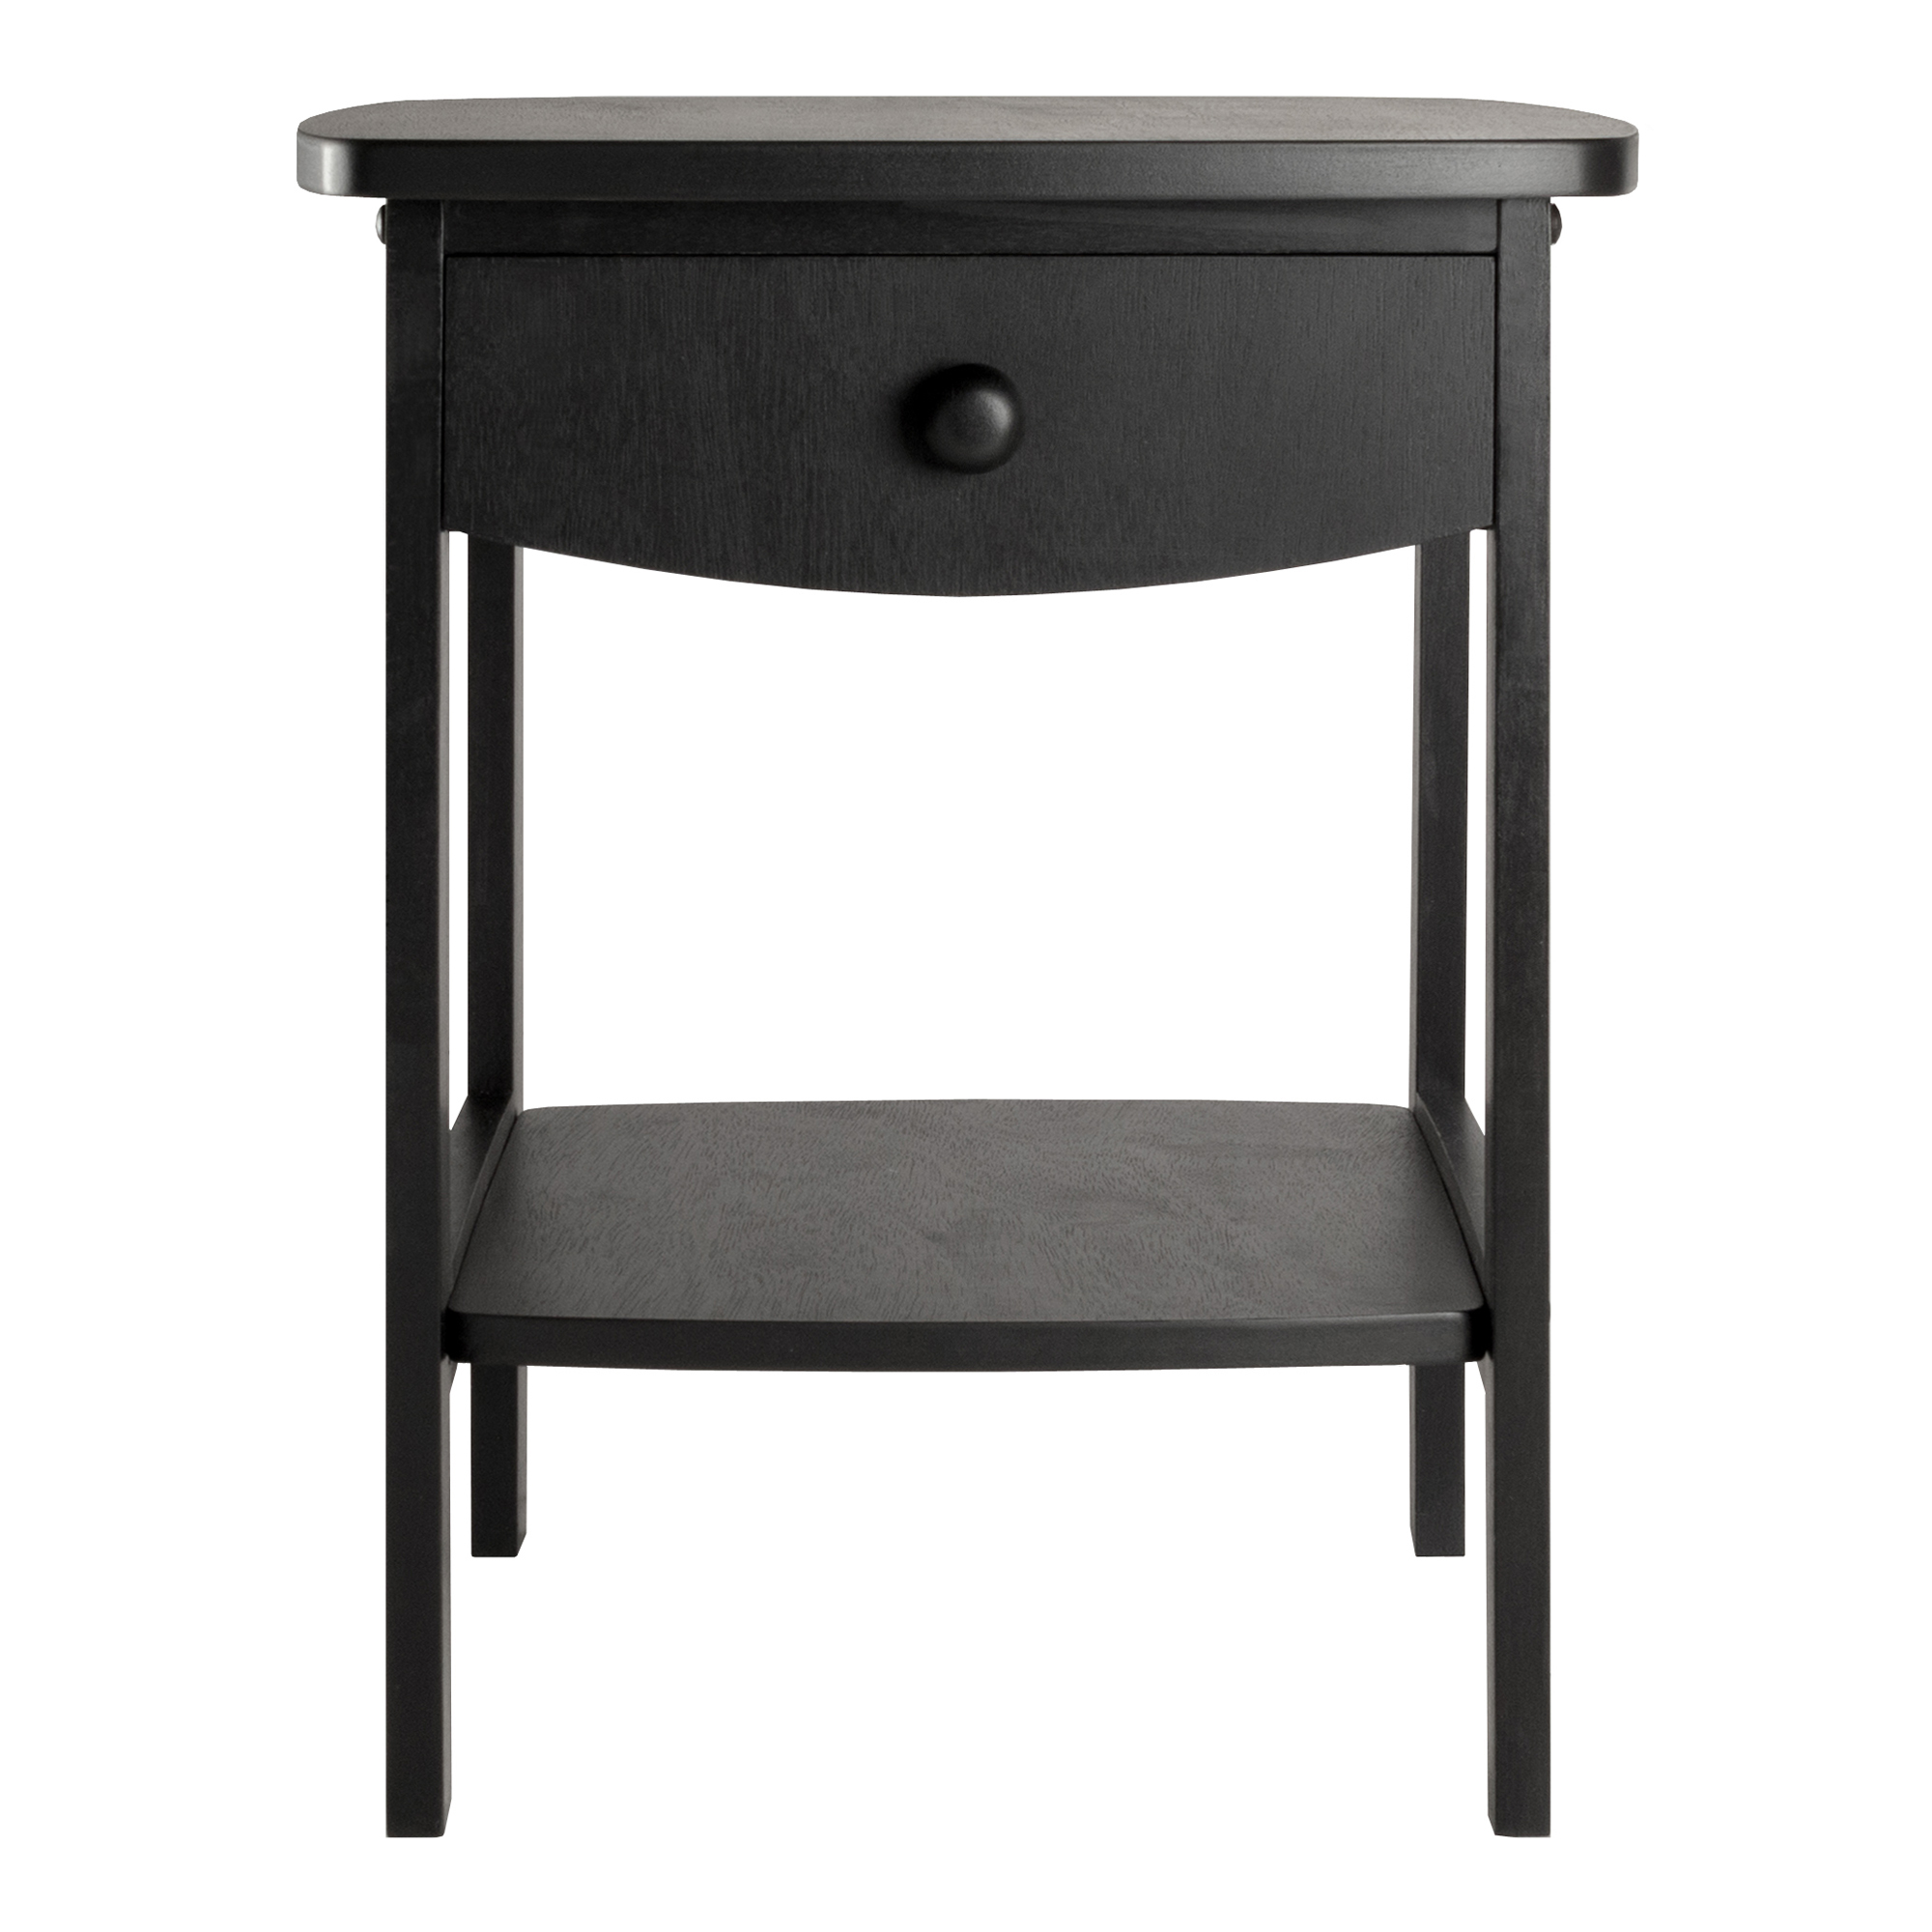 Winsome Wood Claire Curved Nightstand, Black Finish - image 5 of 5